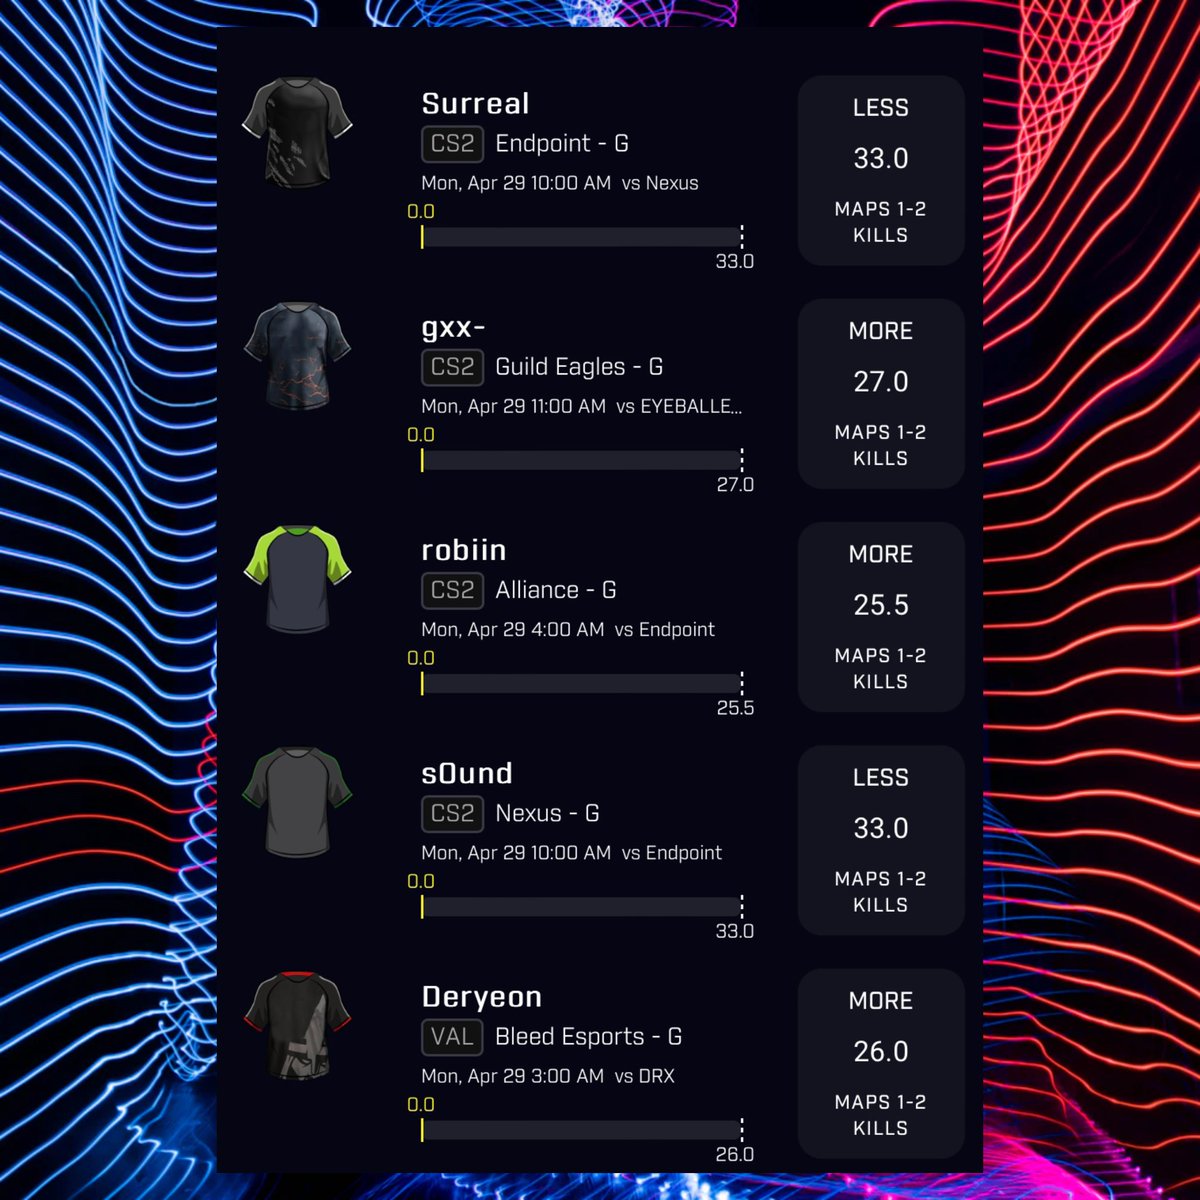 Esports slip on PrizePicks 🔫

If this hits I’ll give one lucky follower access to my premium discord for only $1 on the first month! All you have to do is leave a like on this post to have a chance to win.

To tail this slip click here 👇
prizepicks.onelink.me/gCQS/shareEntr…